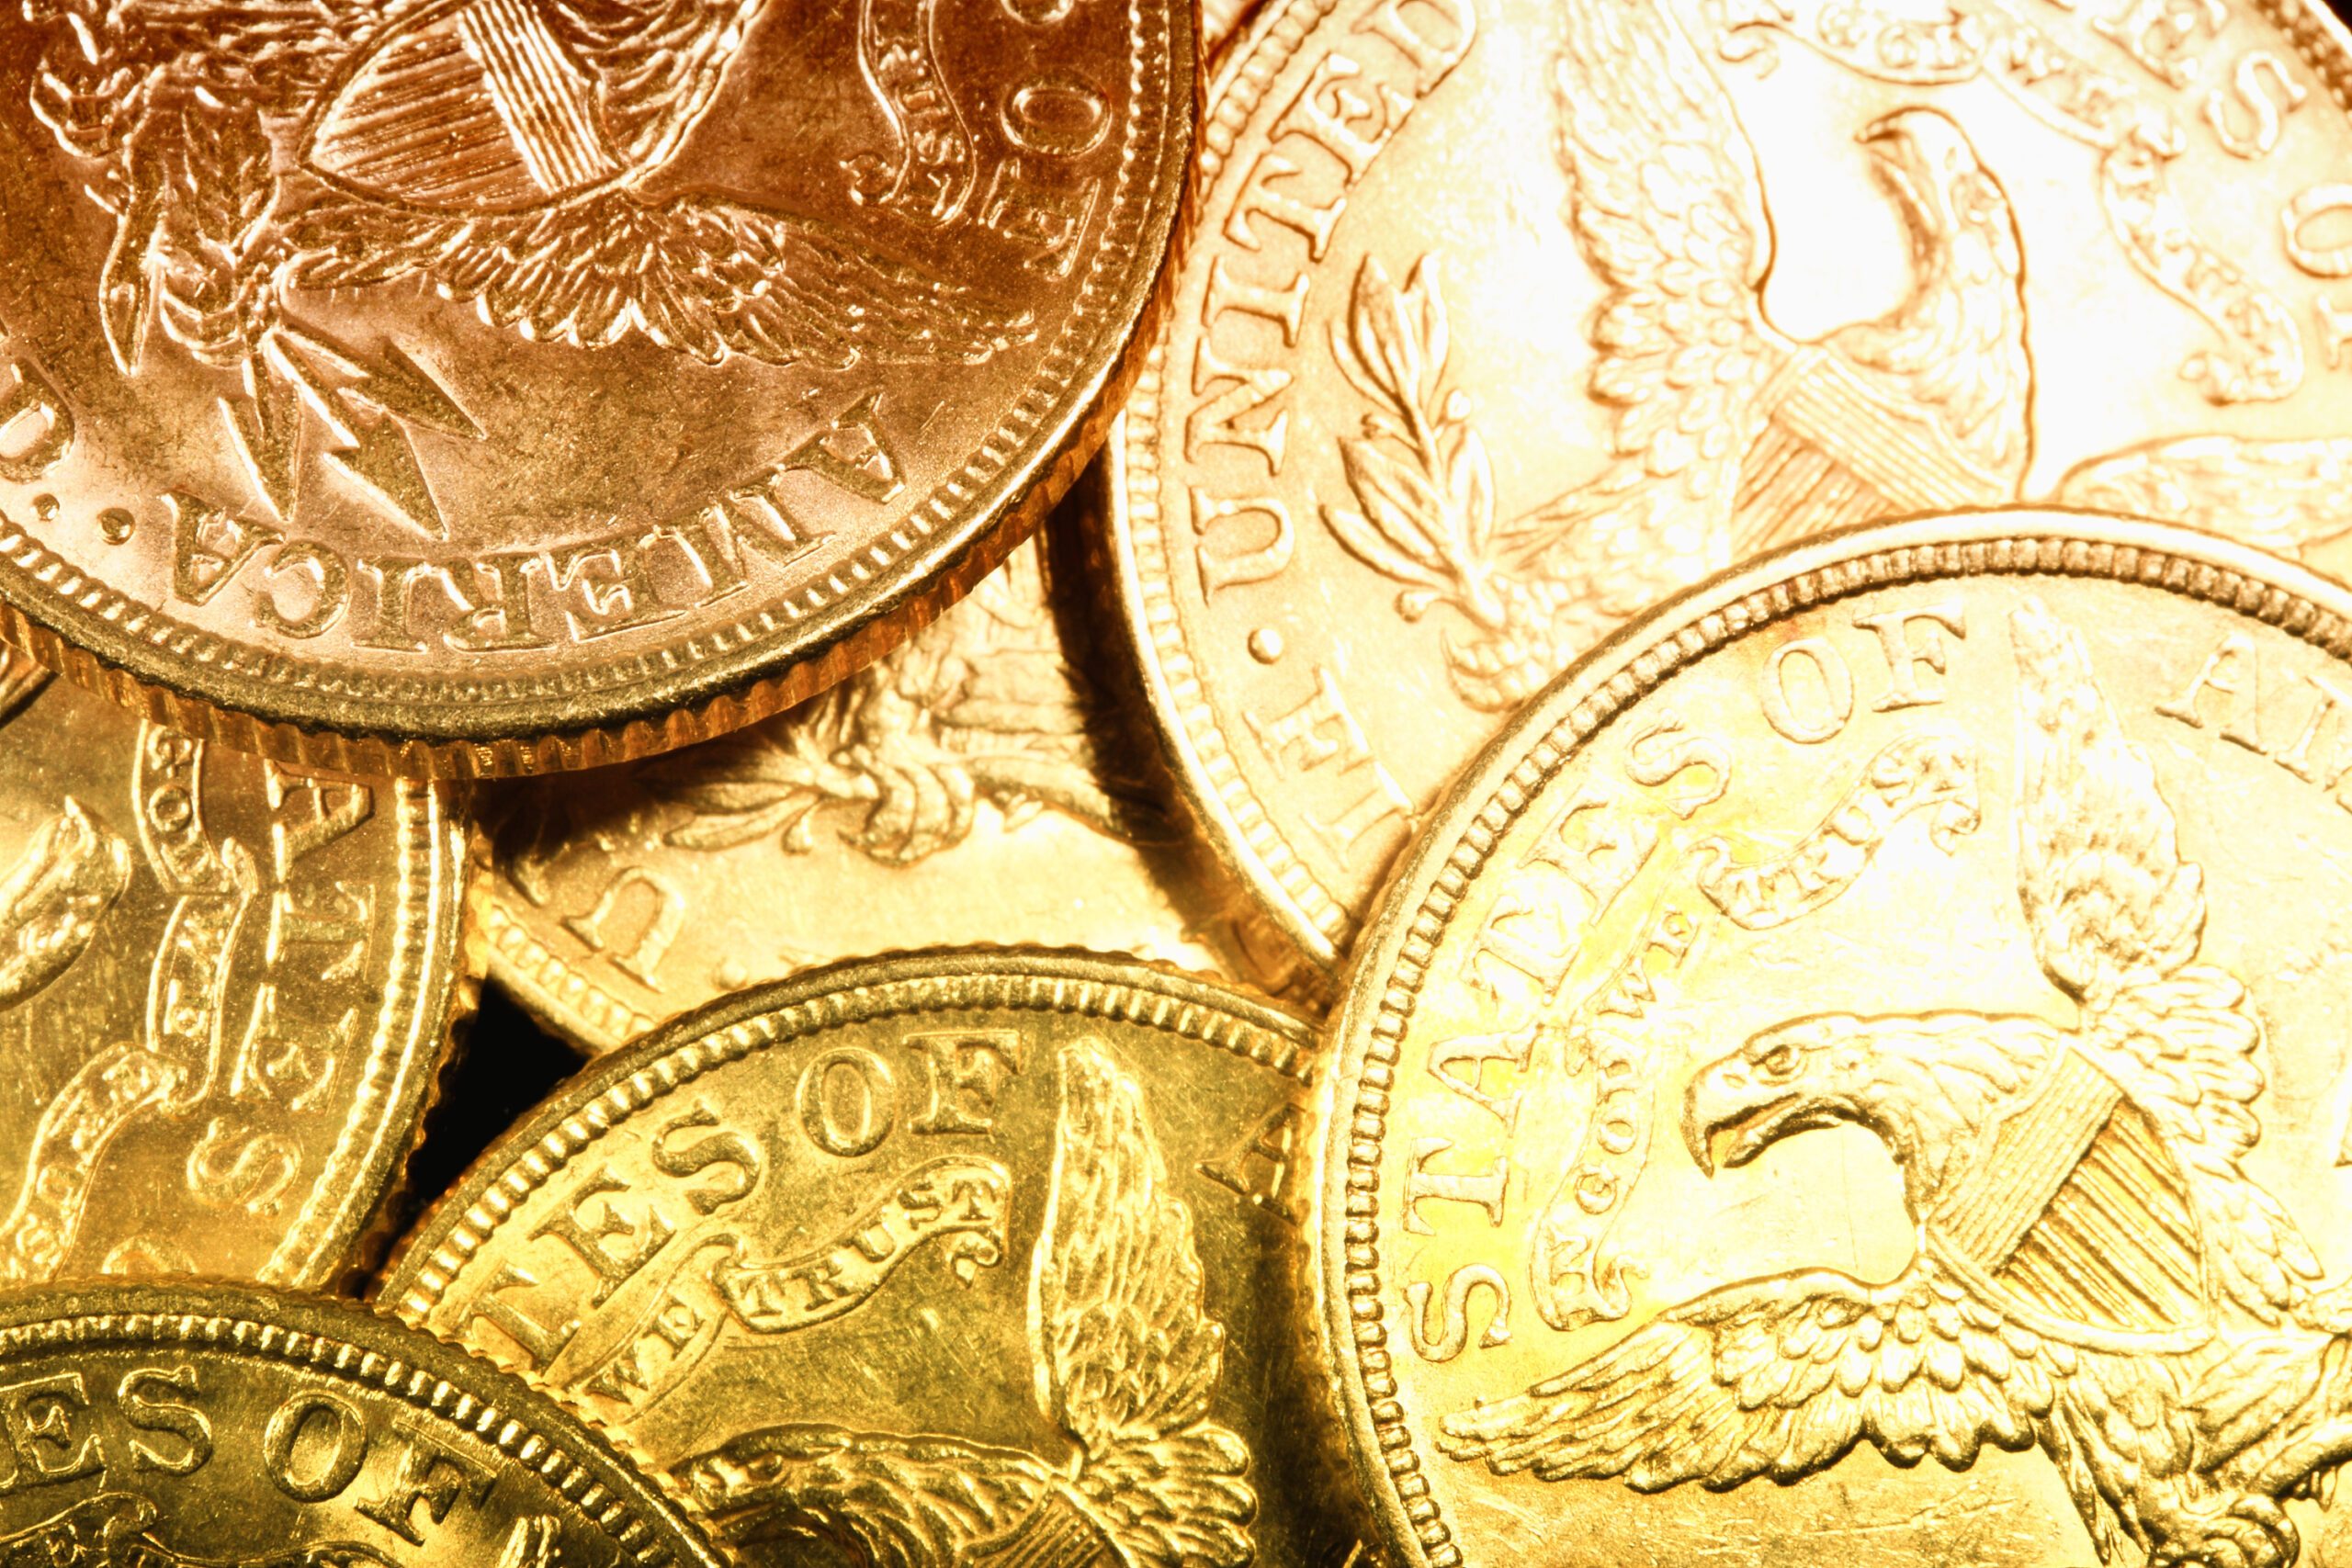 A close-up view of a collection of shiny, inherited gold coins featuring detailed engravings of eagles